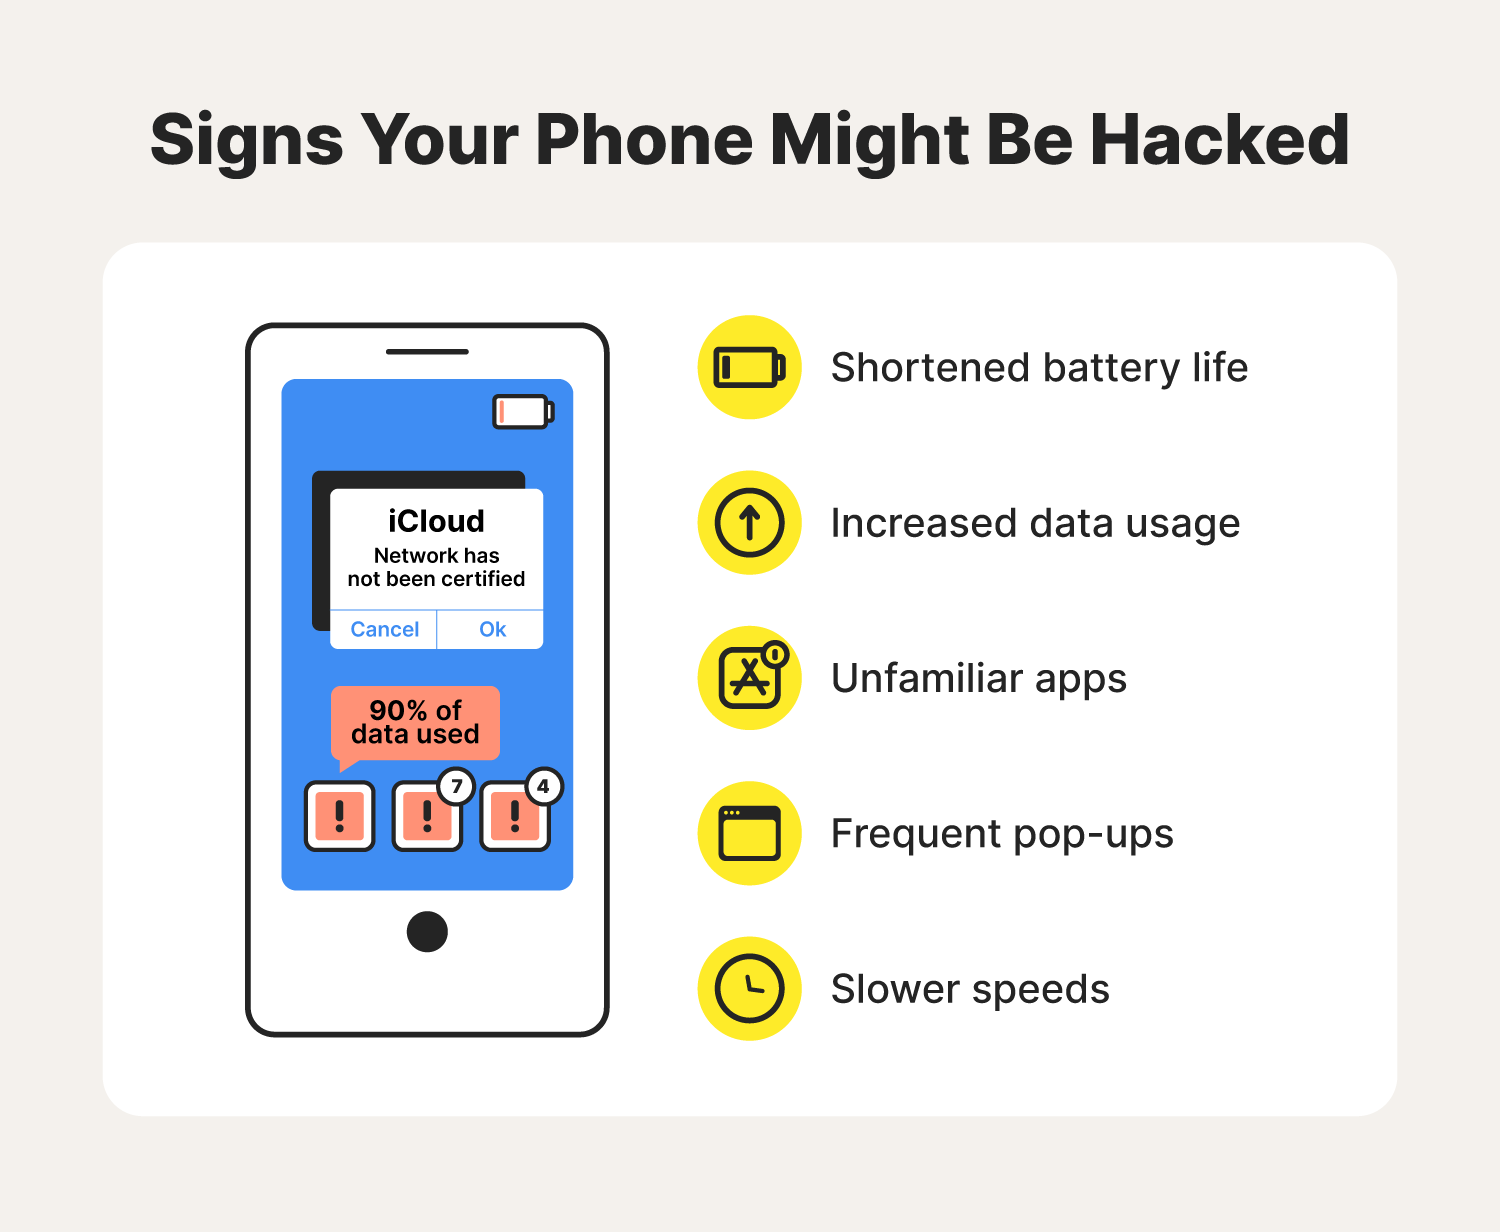 Six illustrations accompany phone hacking signs that you learn after searching "how to remove a hacker from my phone."